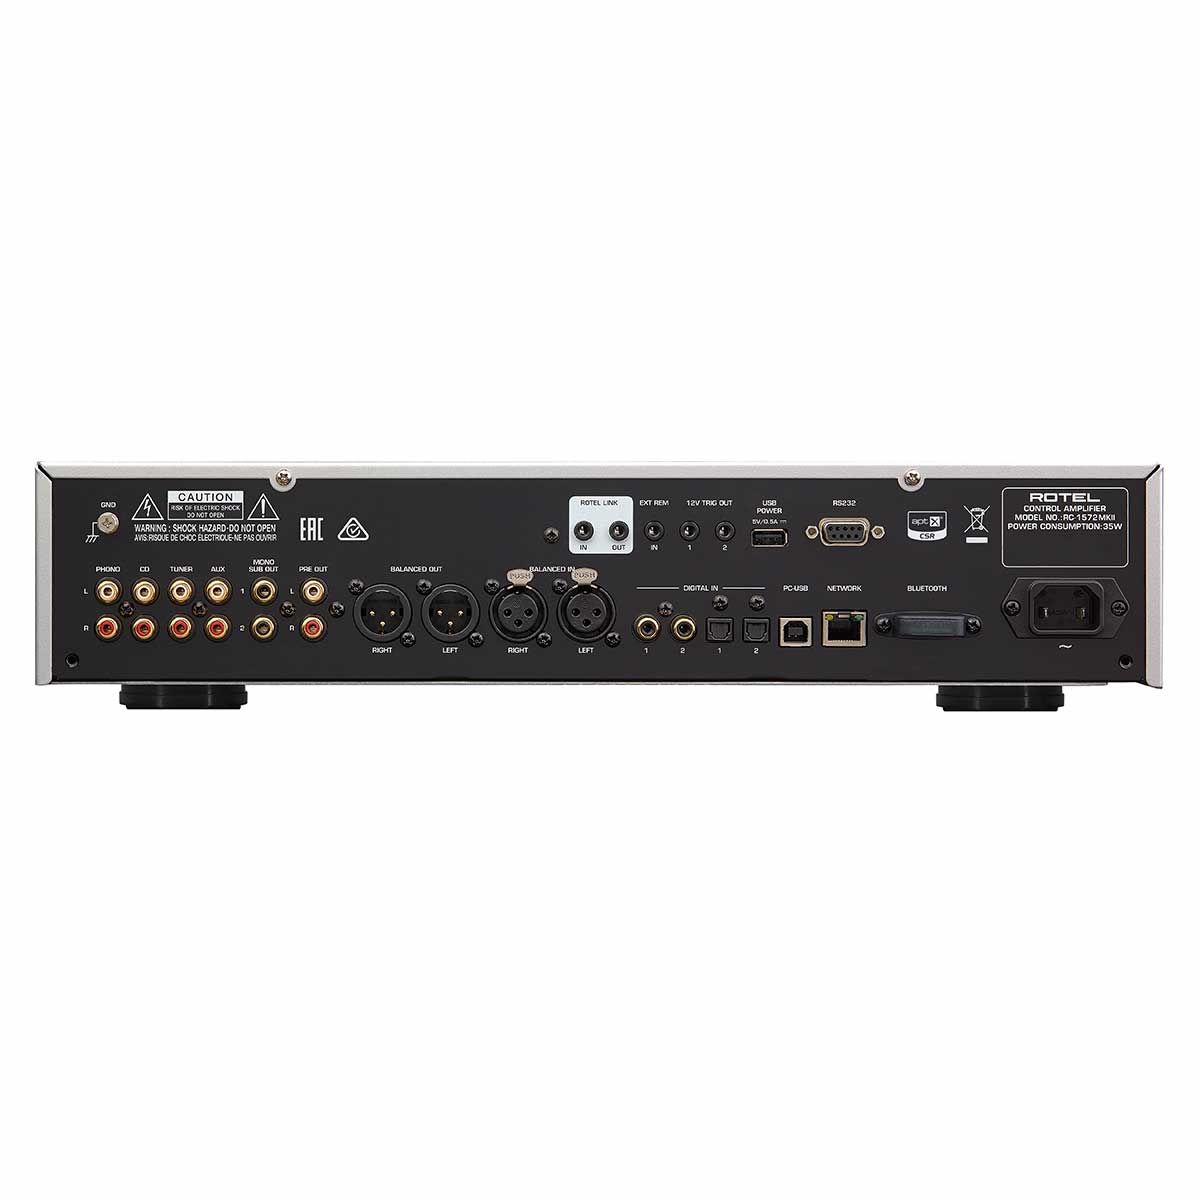 Rotel RC-1572 MKII Stereo Preamplifier, Silver, rear view